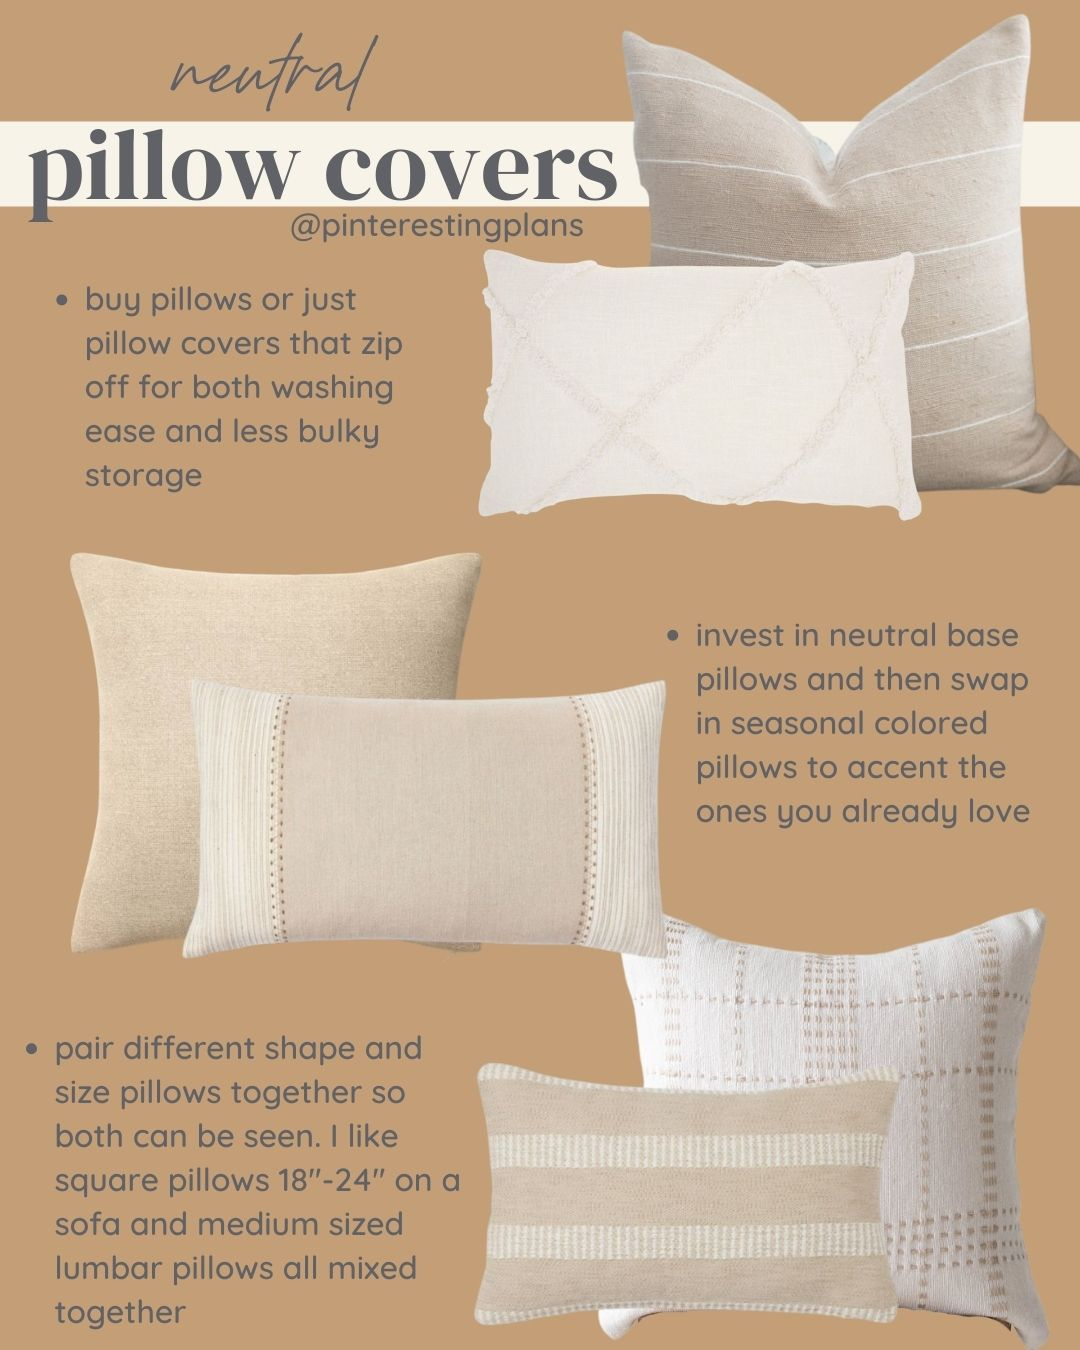 Pillow Shams Vs. Pillow Cases: What's The Difference?